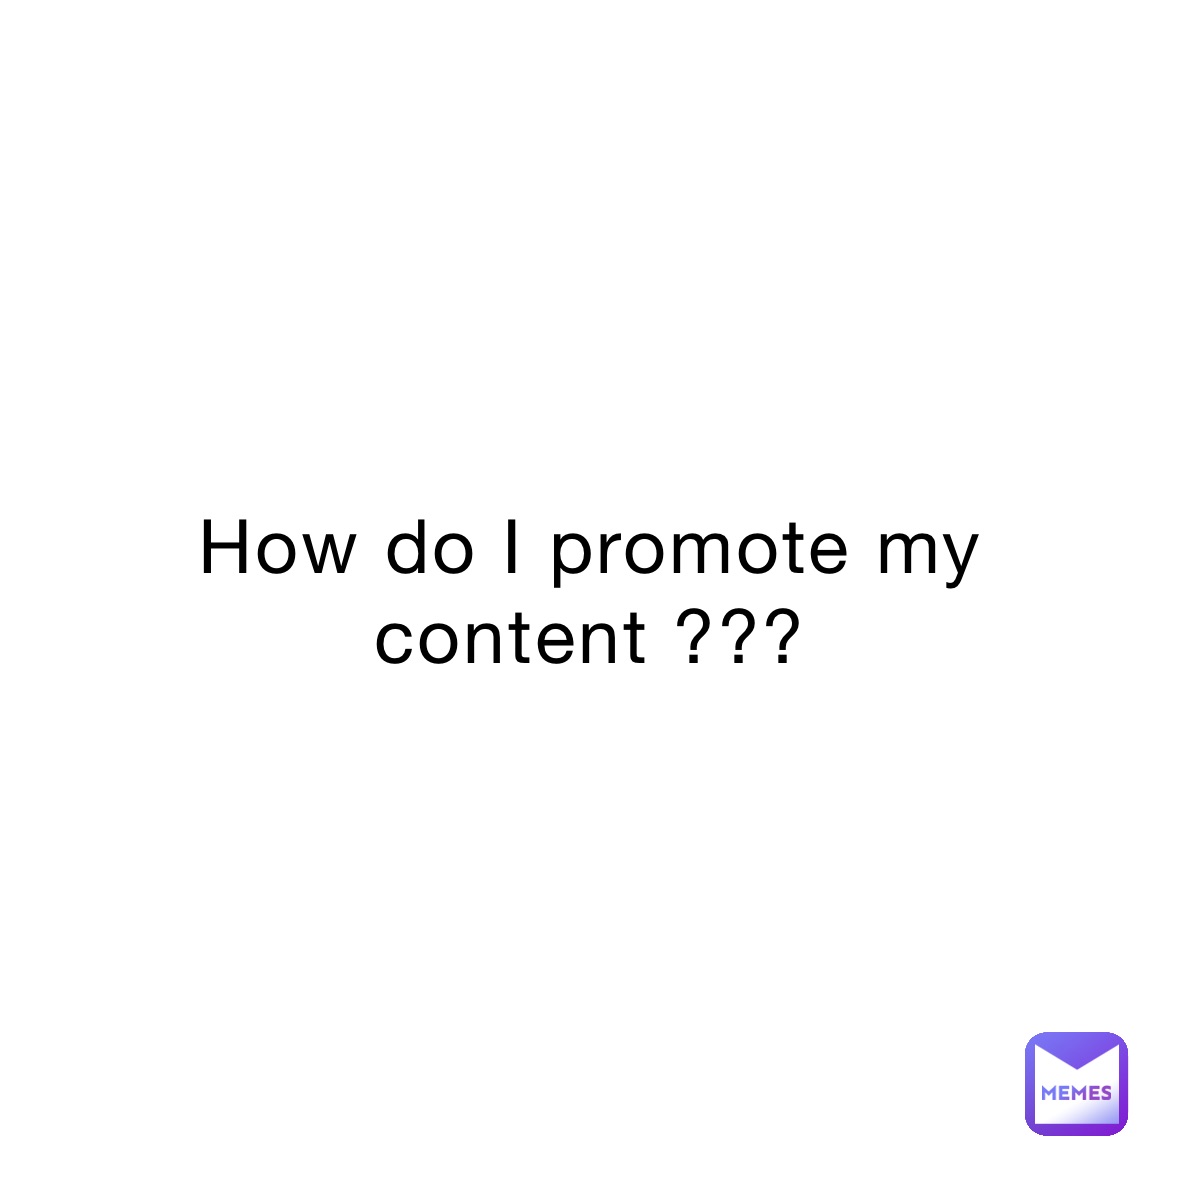 How do I promote my content ???